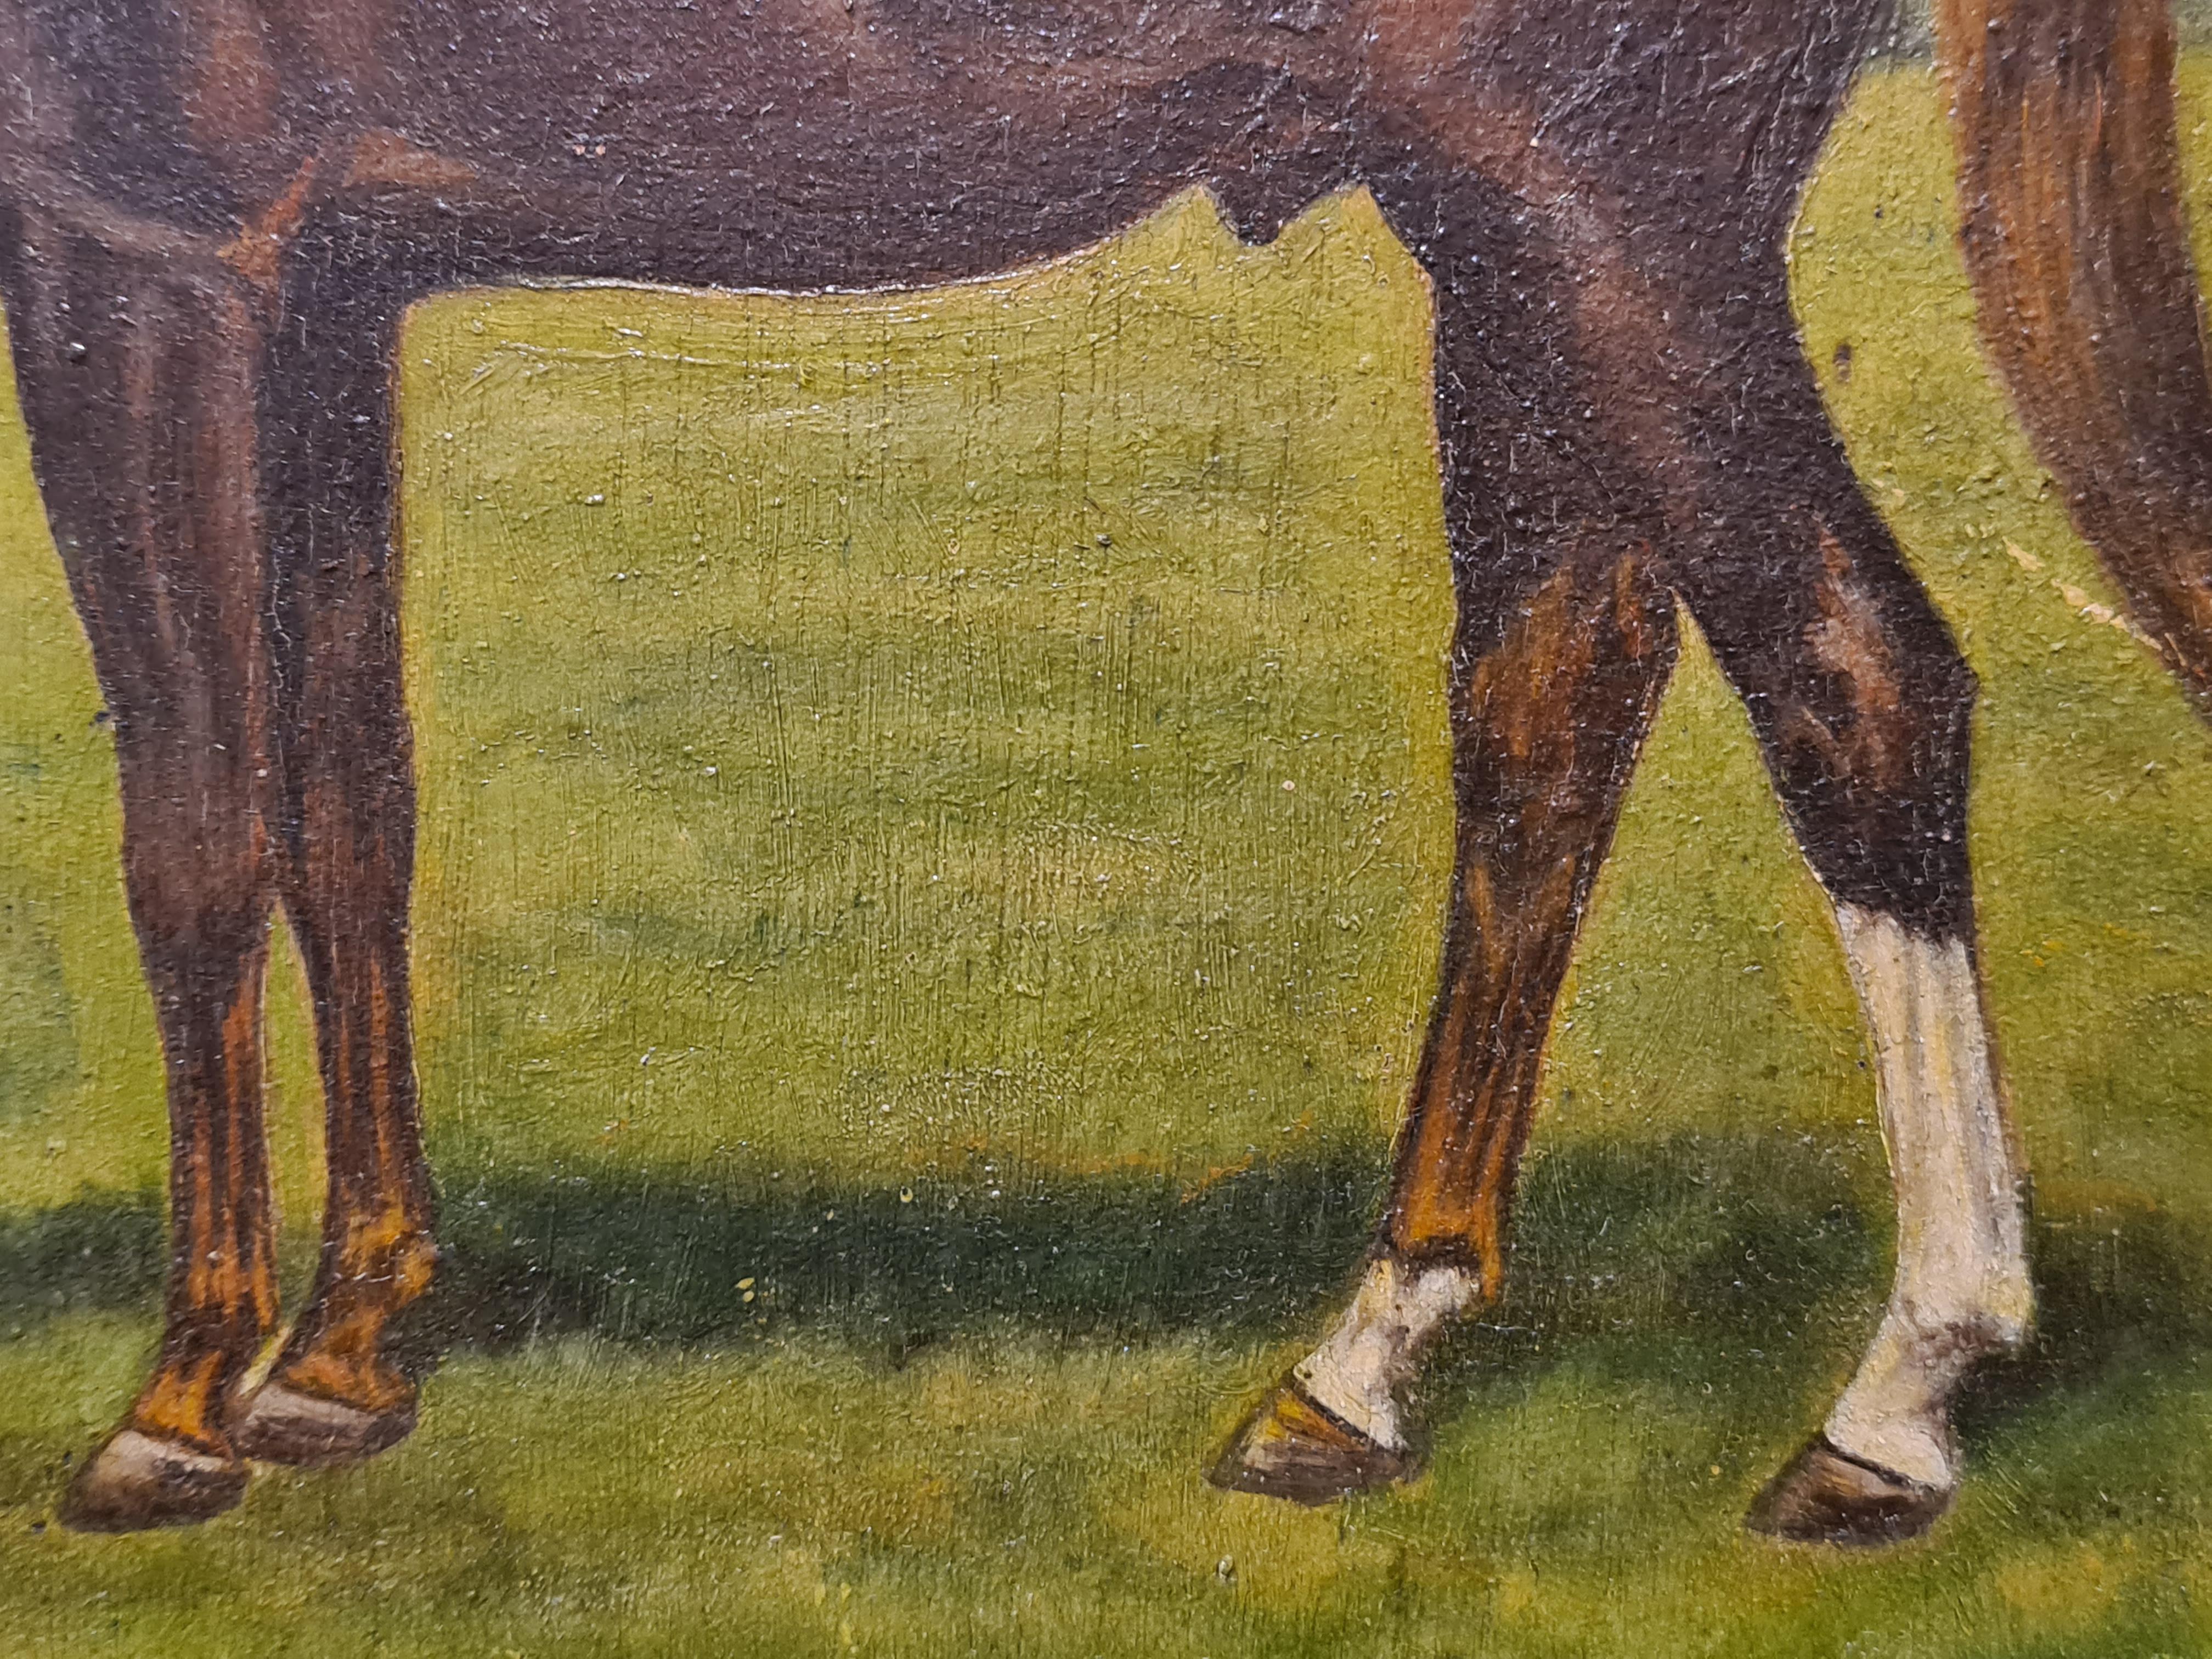 Thoroughbred Stallion, Early 20th Century Oil on Wood Panel. 1